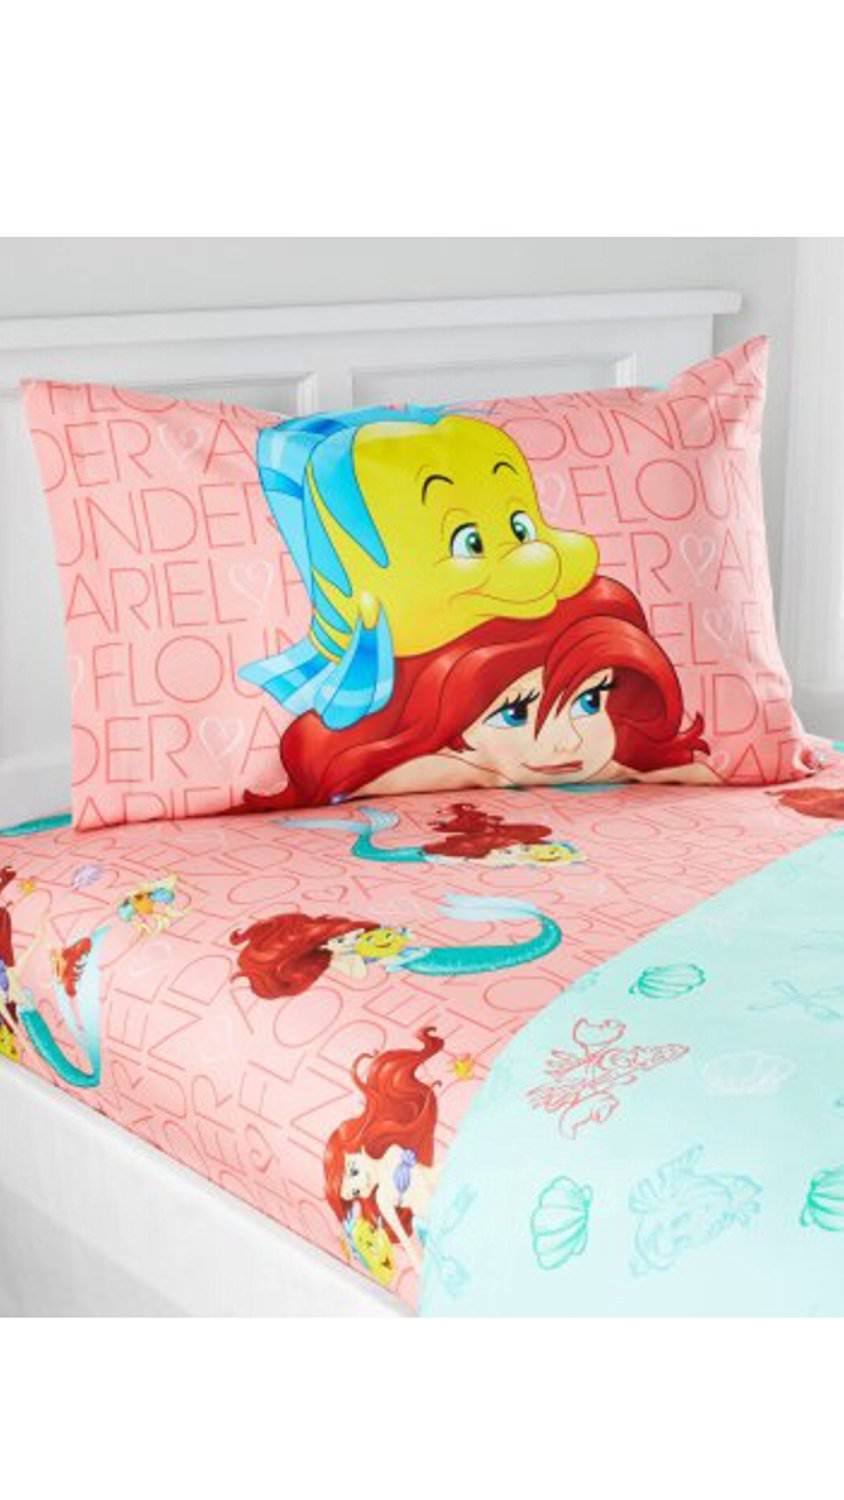 Ariel Sketch Bedding At Paintingvalley Com Explore Collection Of